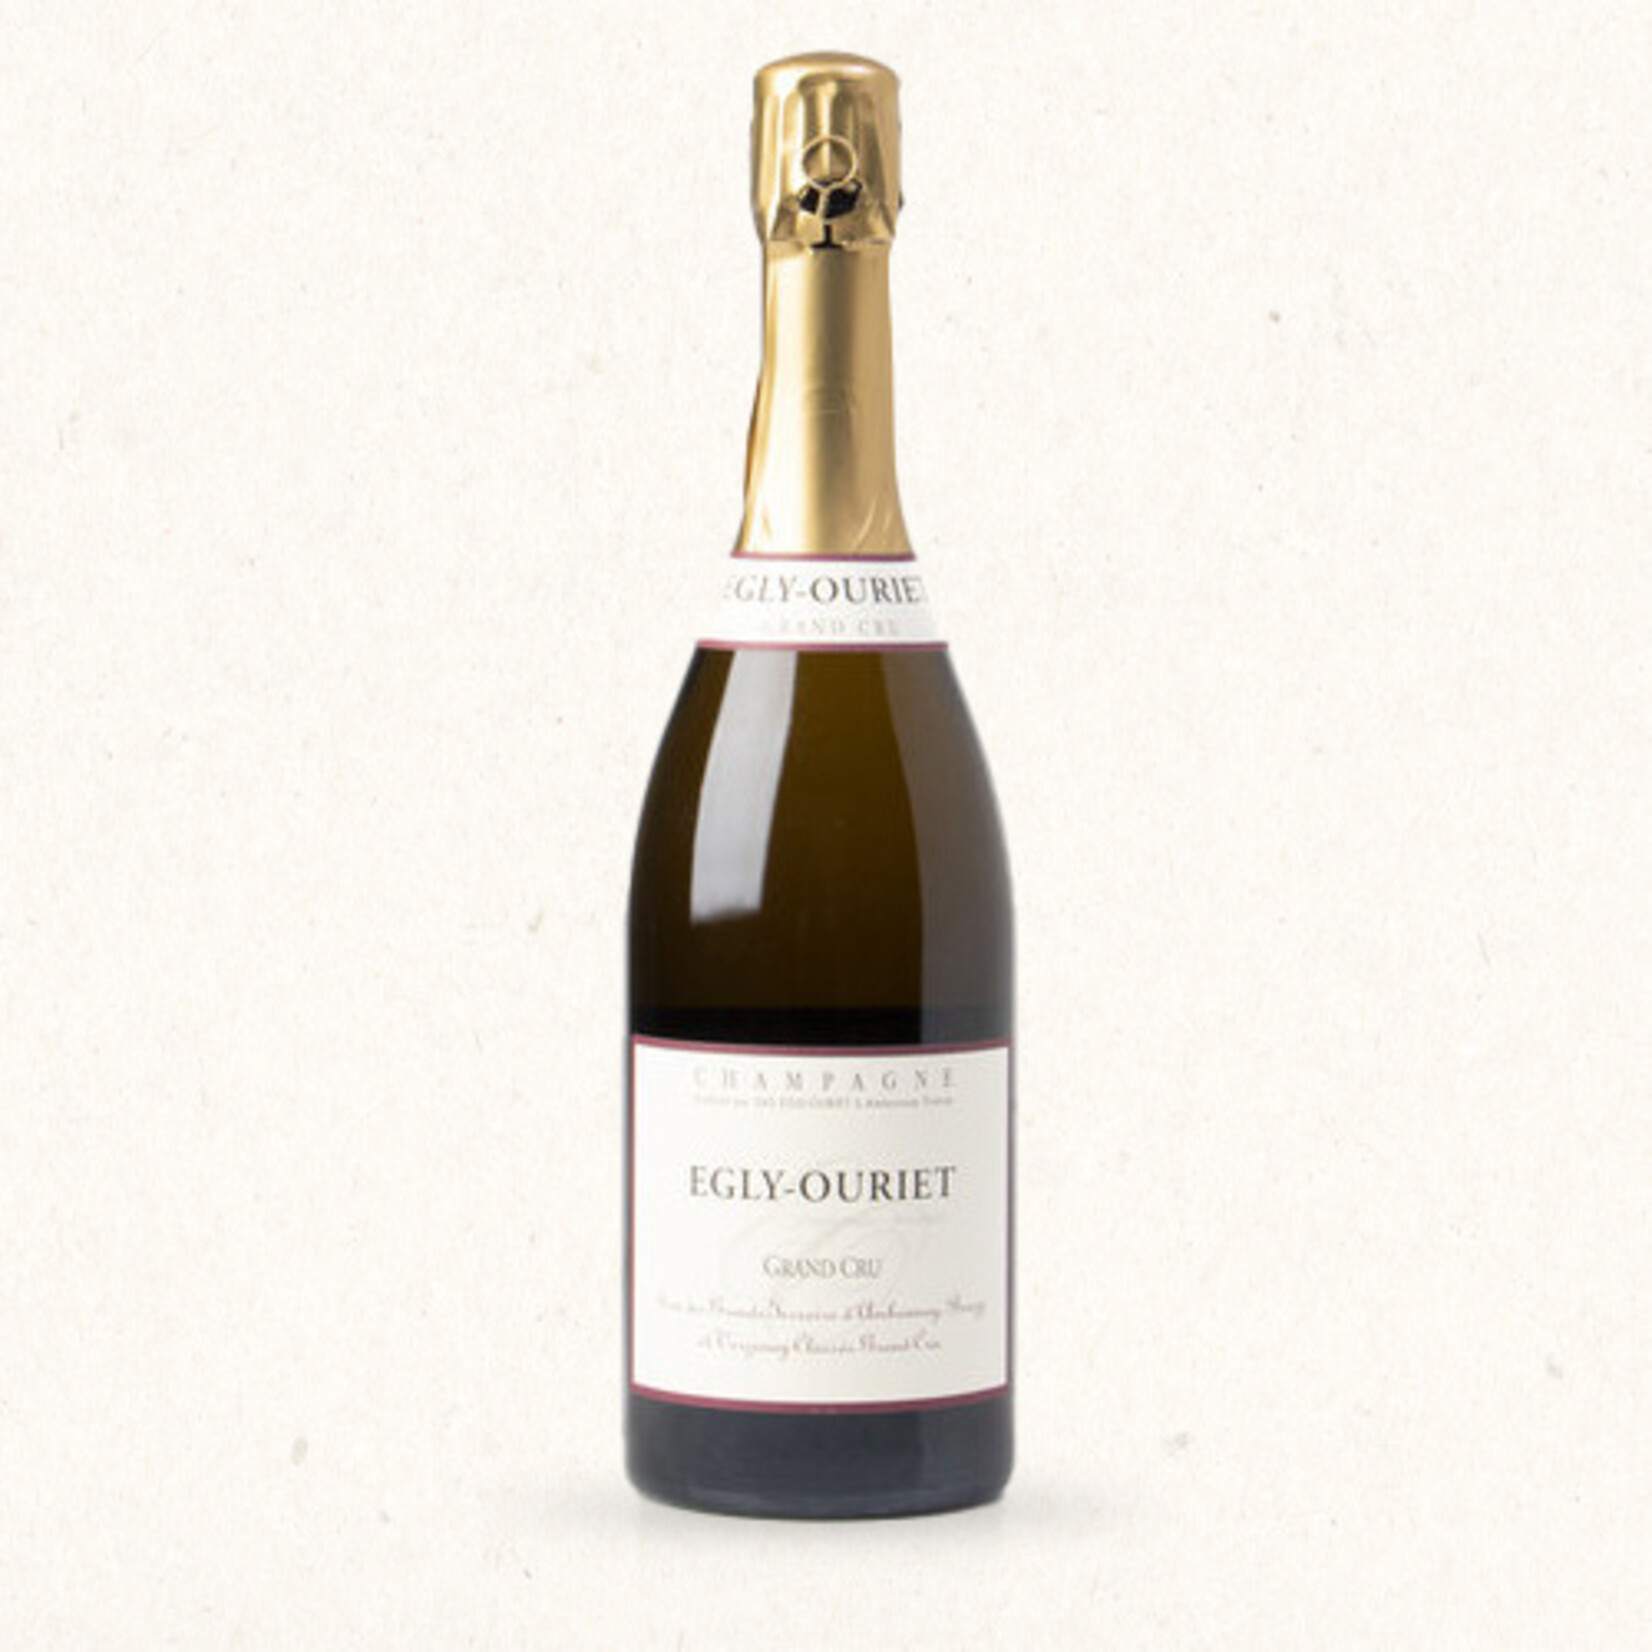 Egly-Ouriet Grand cru extra brut (July 2021)